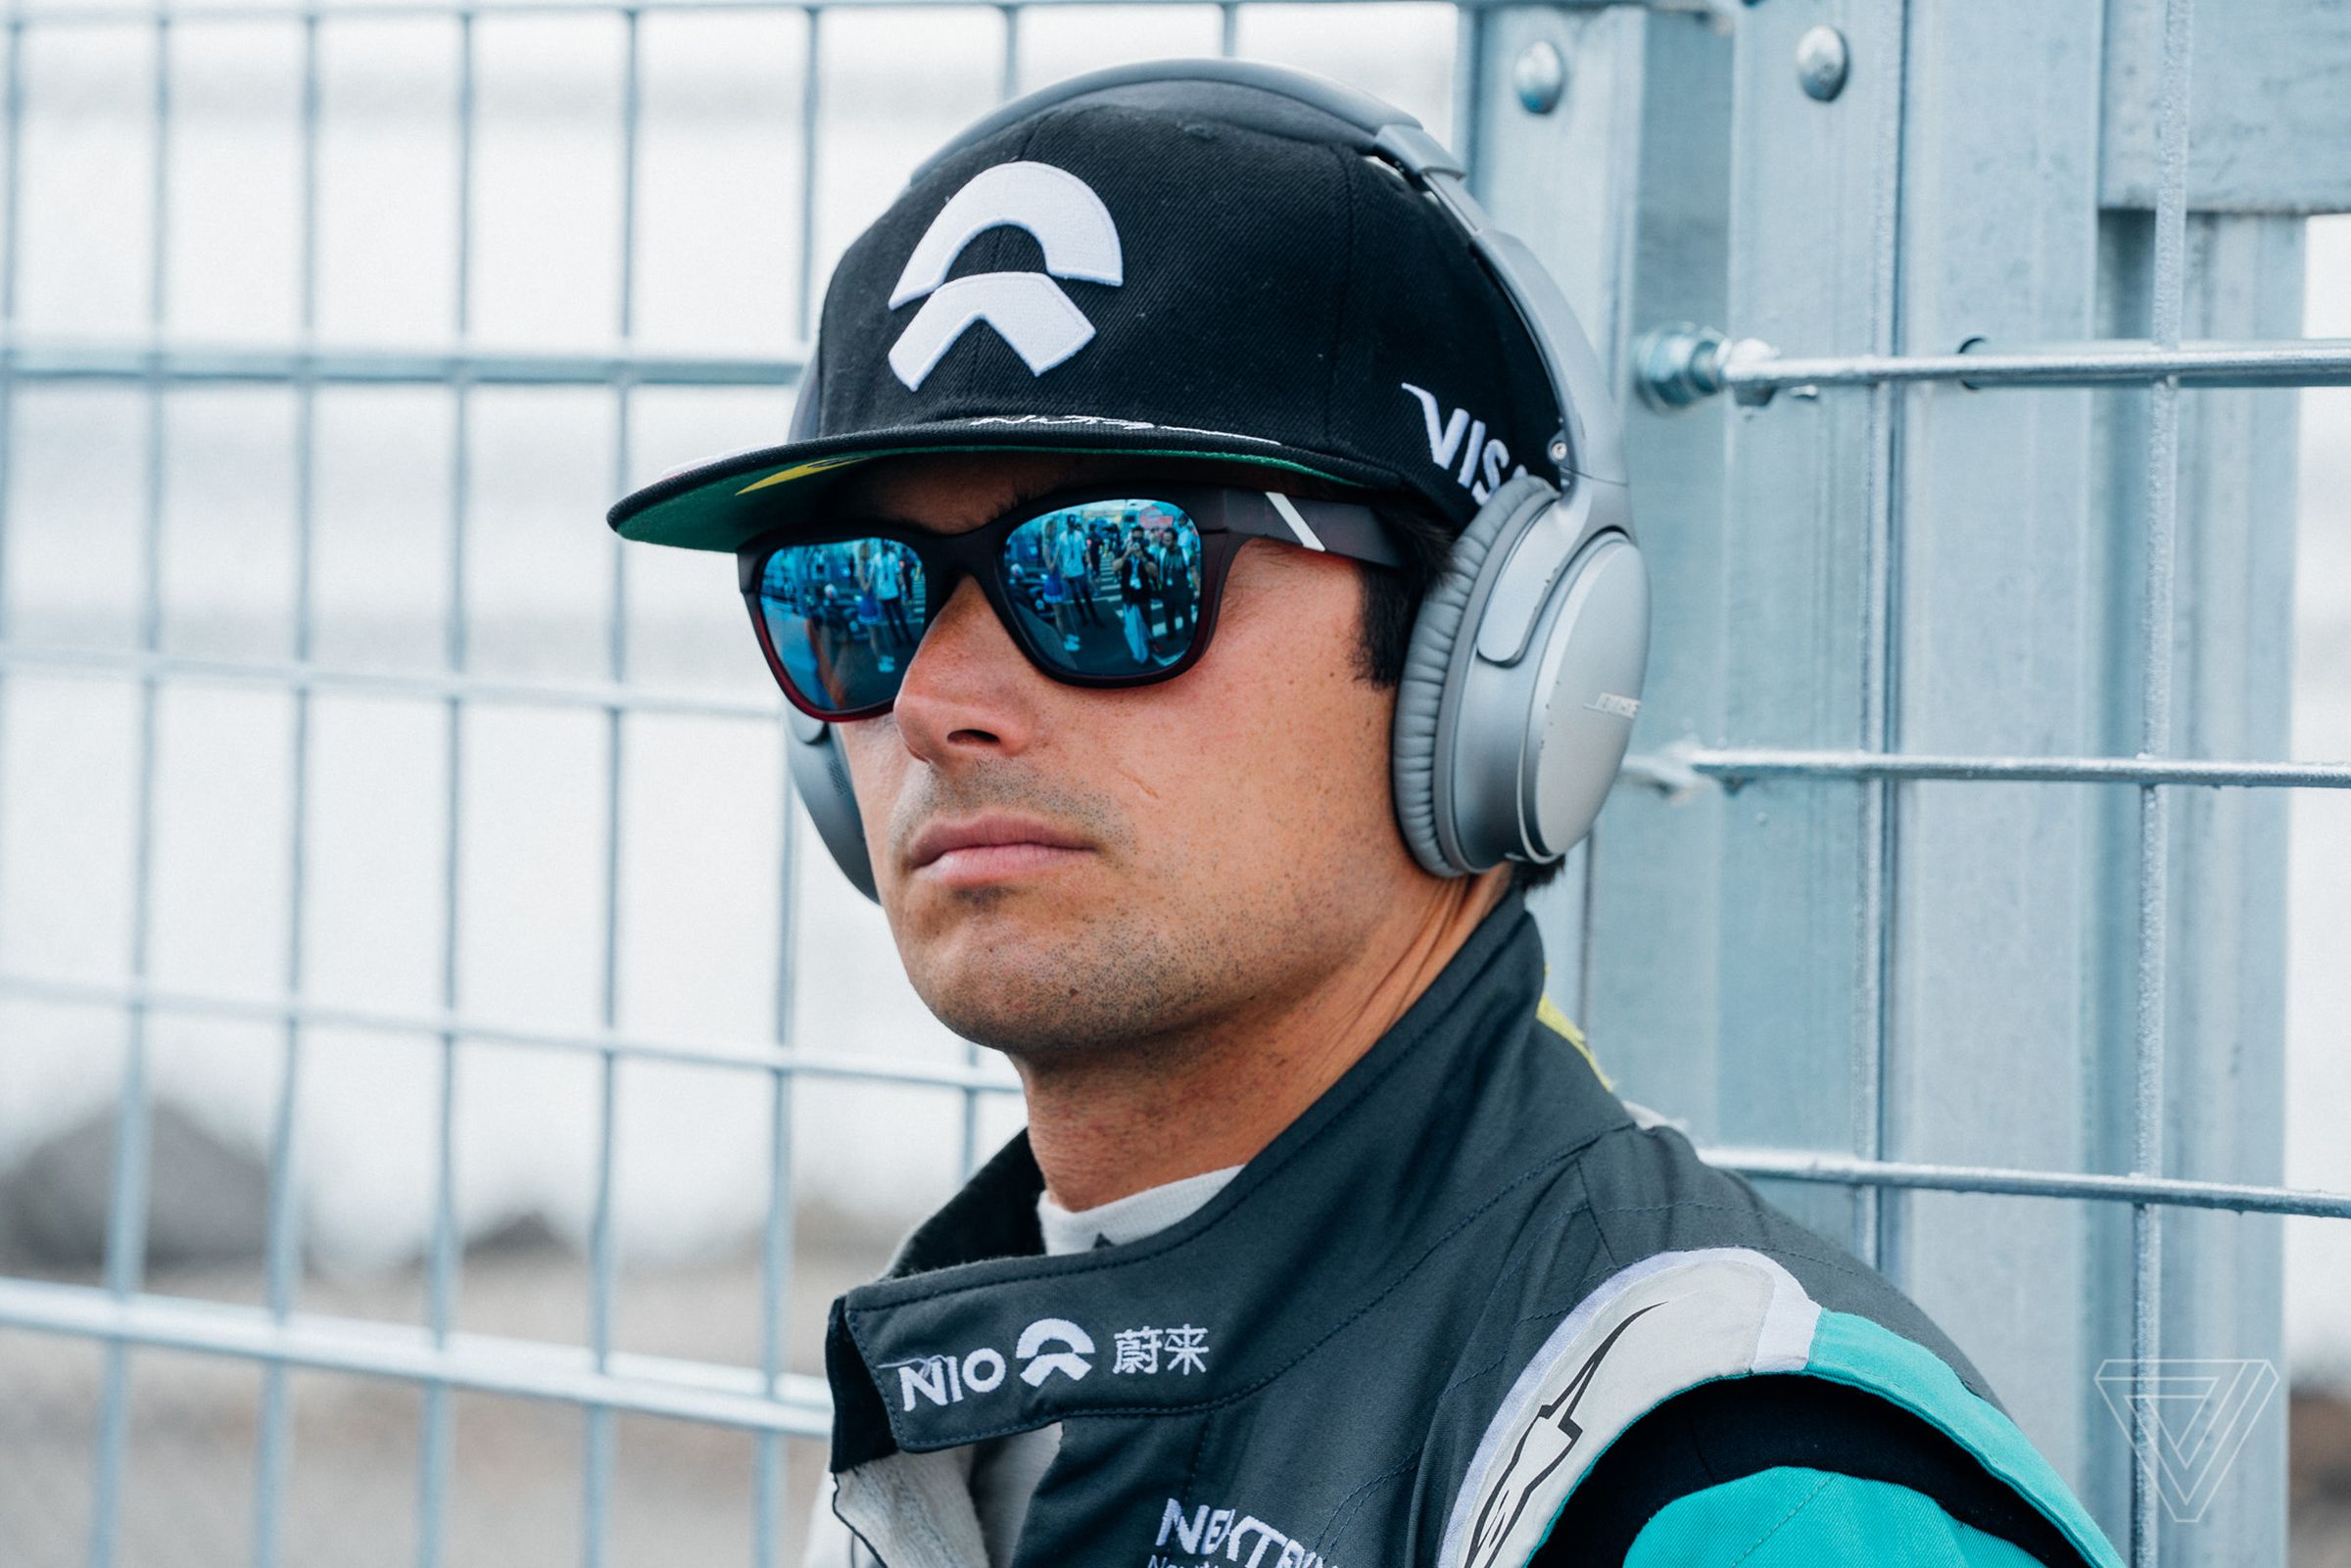 Season 1 champion Nelson Piquet, Jr. uses a pair of Bose noise-canceling headphones to muffle the noise on the starting grid.